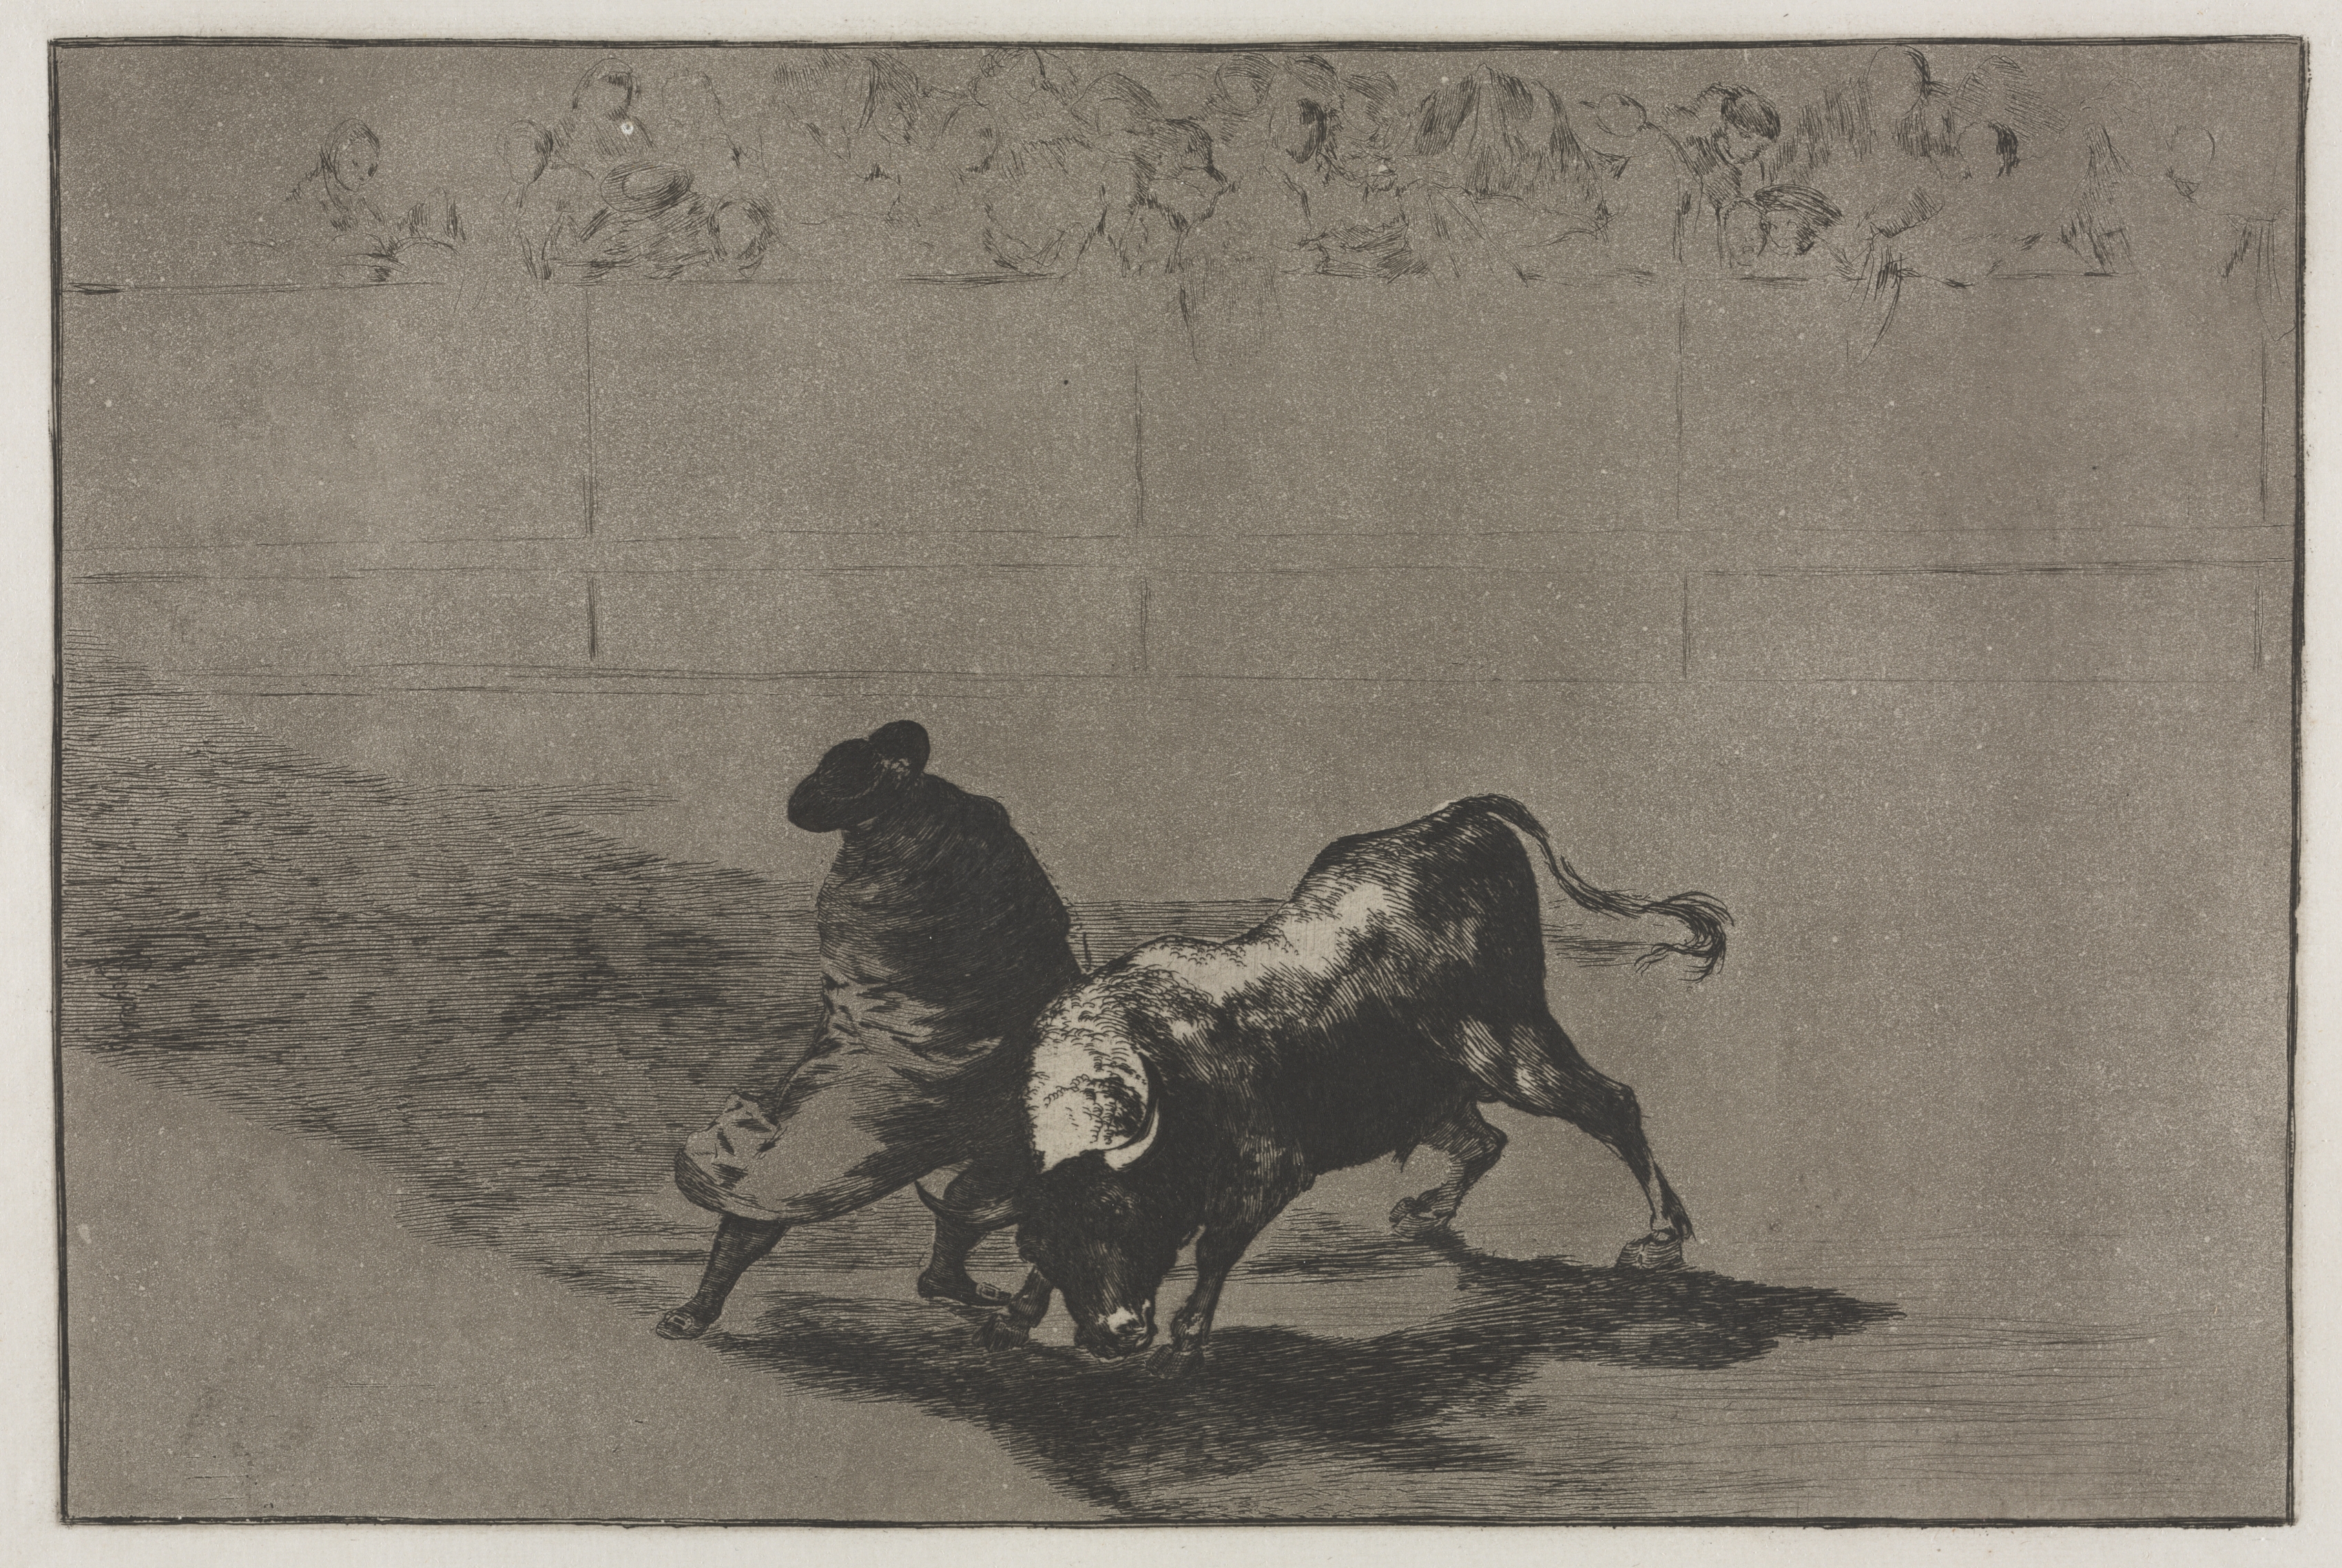 Bullfights:  The Very Skilful Student of Falces, Wrapped in his Cape, Tricks the Bull with the Play of his Body